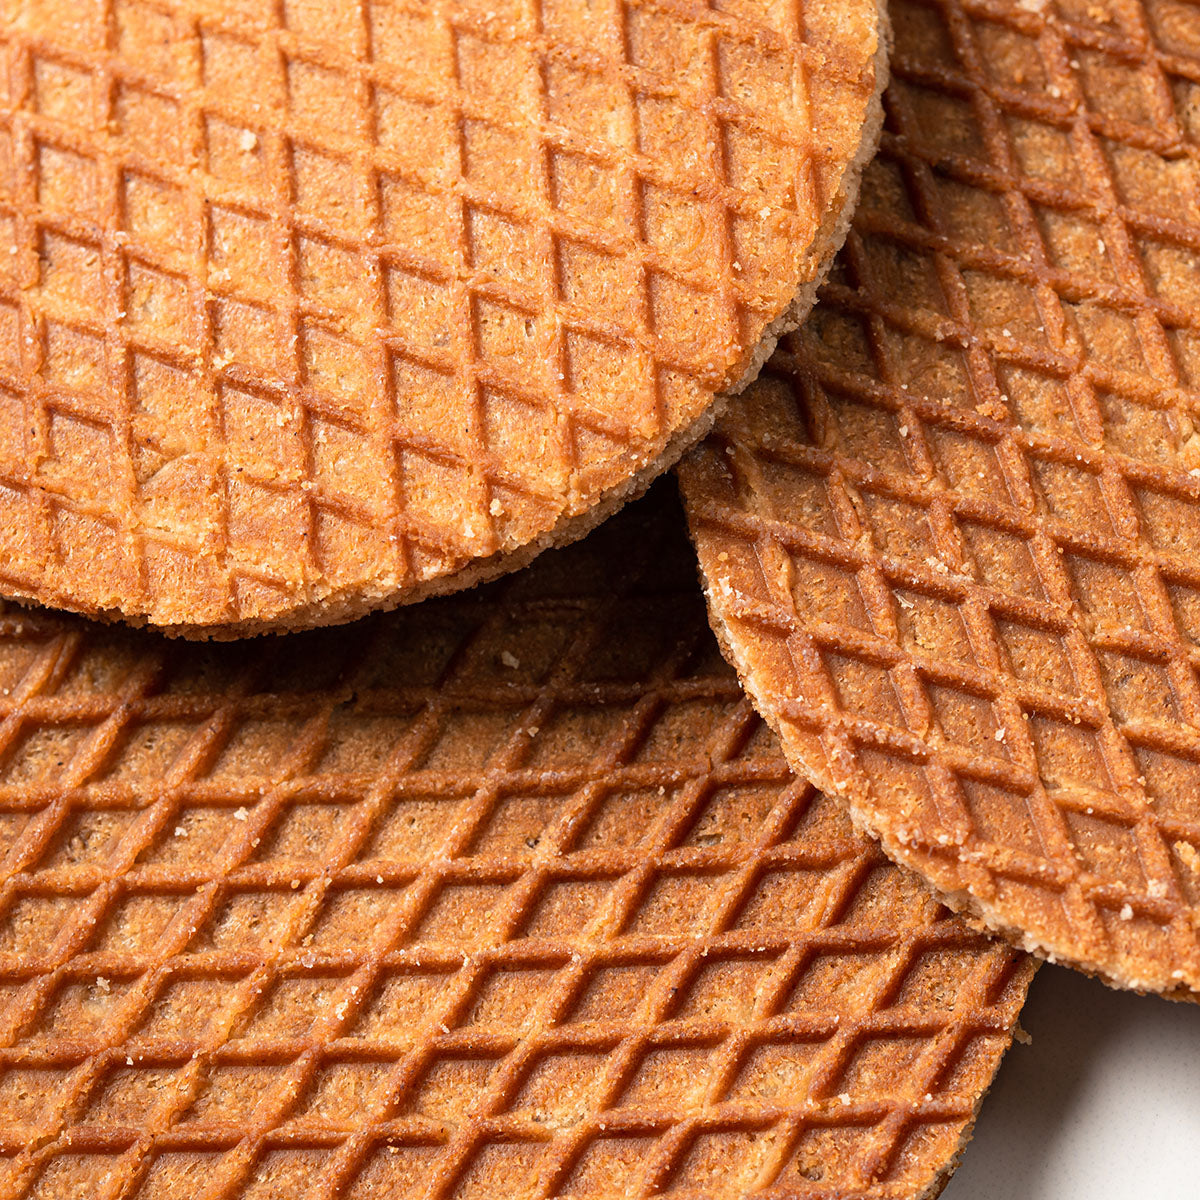 A group of Wonderen Bundle 4x Stroopwafel 8 pack, a sweet treat, on a white plate.